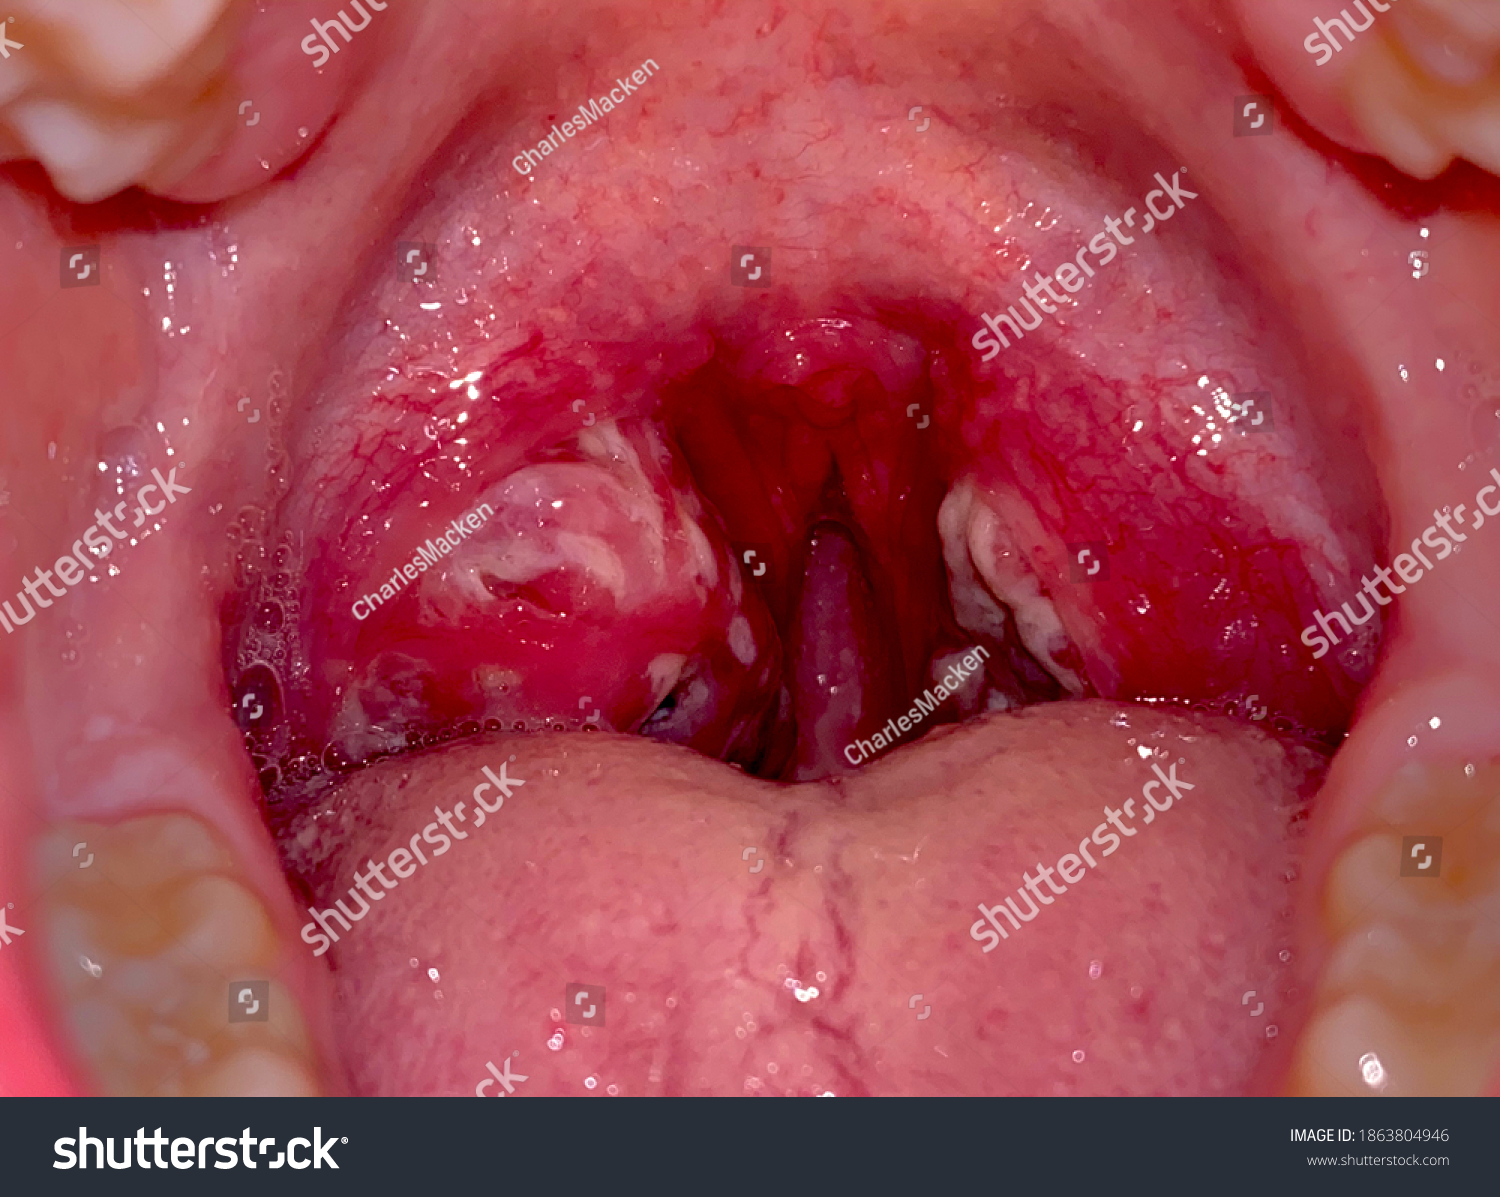 Severe Streptococcal Pharyngitis shown in a white adult male. #1863804946